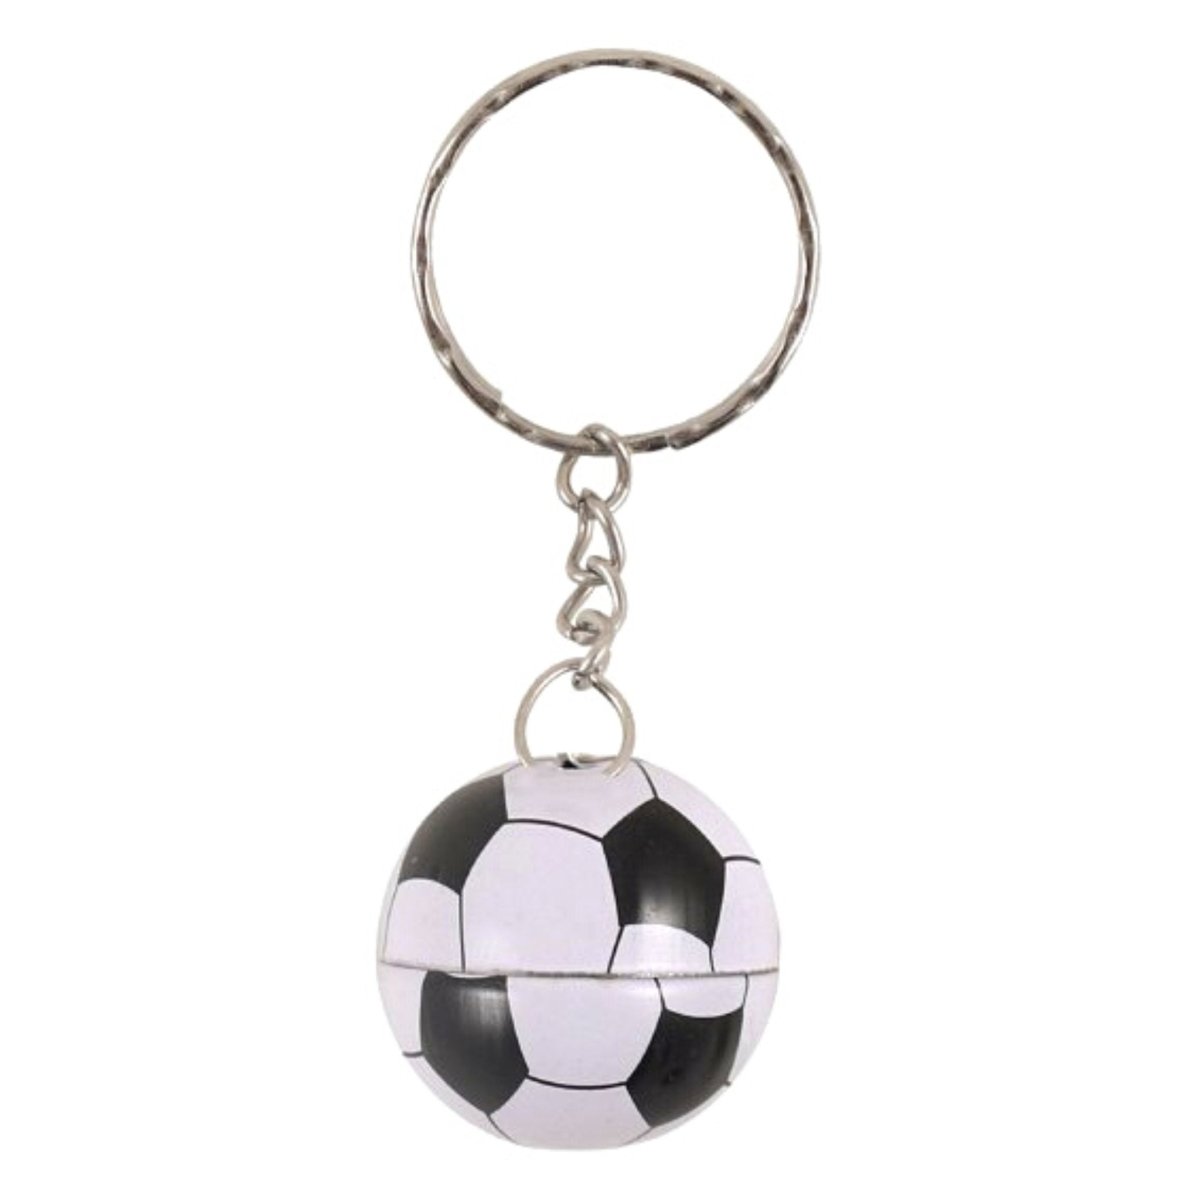 Metal Football Keychain - Kids Party Craft